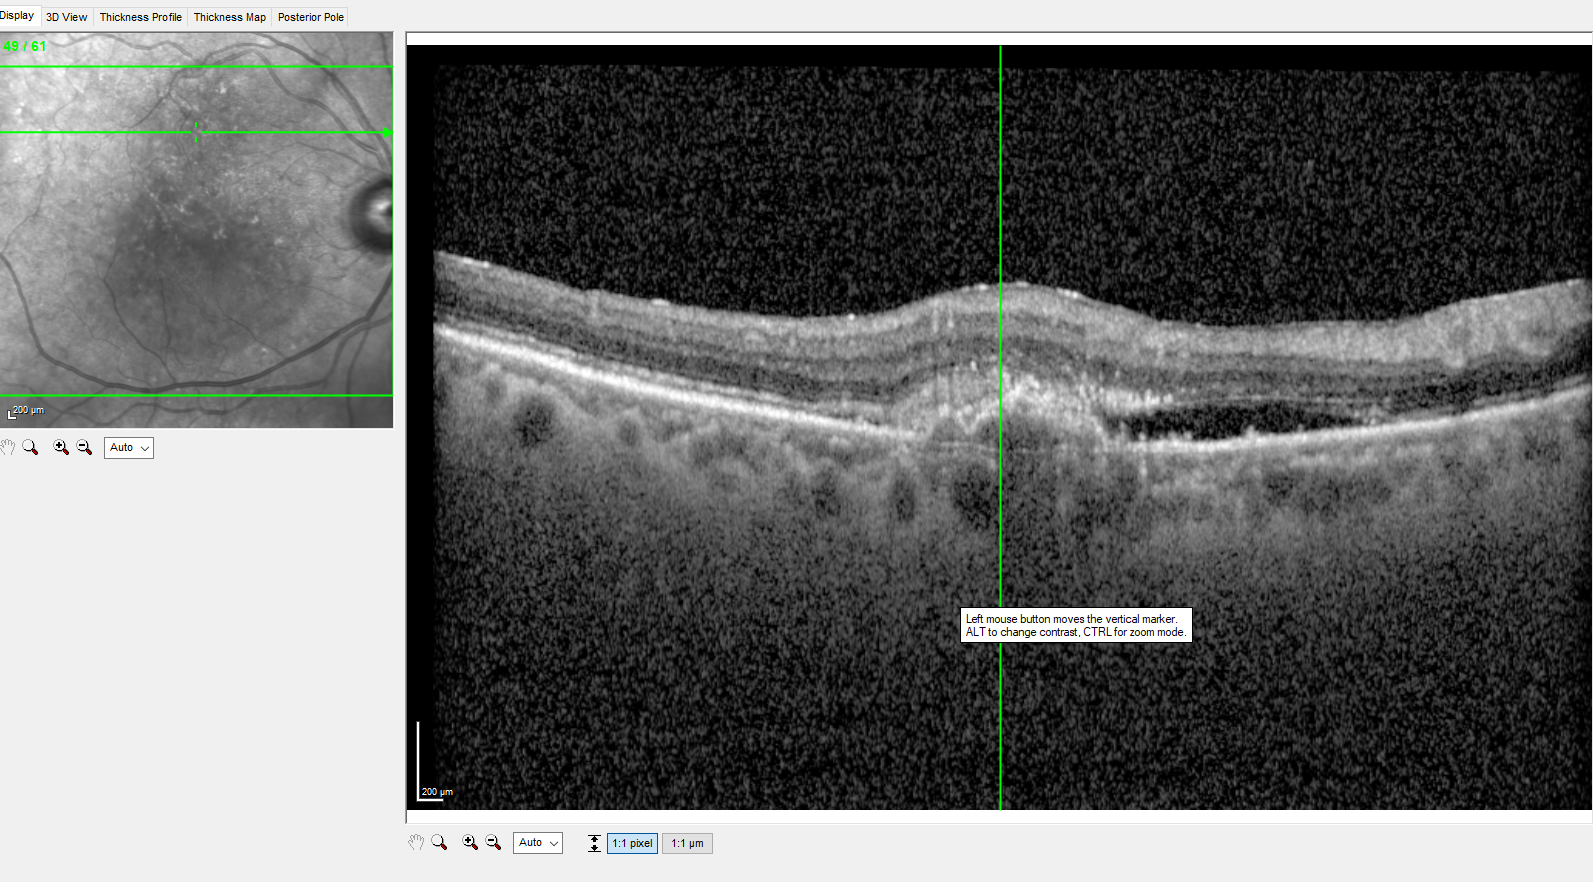 <p>Optical coherence tomography (OCT) image showing neovascular age-related macular degeneration (AMD) with subretinal fluid, retinal pigment epithelial detachment (PED), and subretinal hyperreflective material (SHRM)